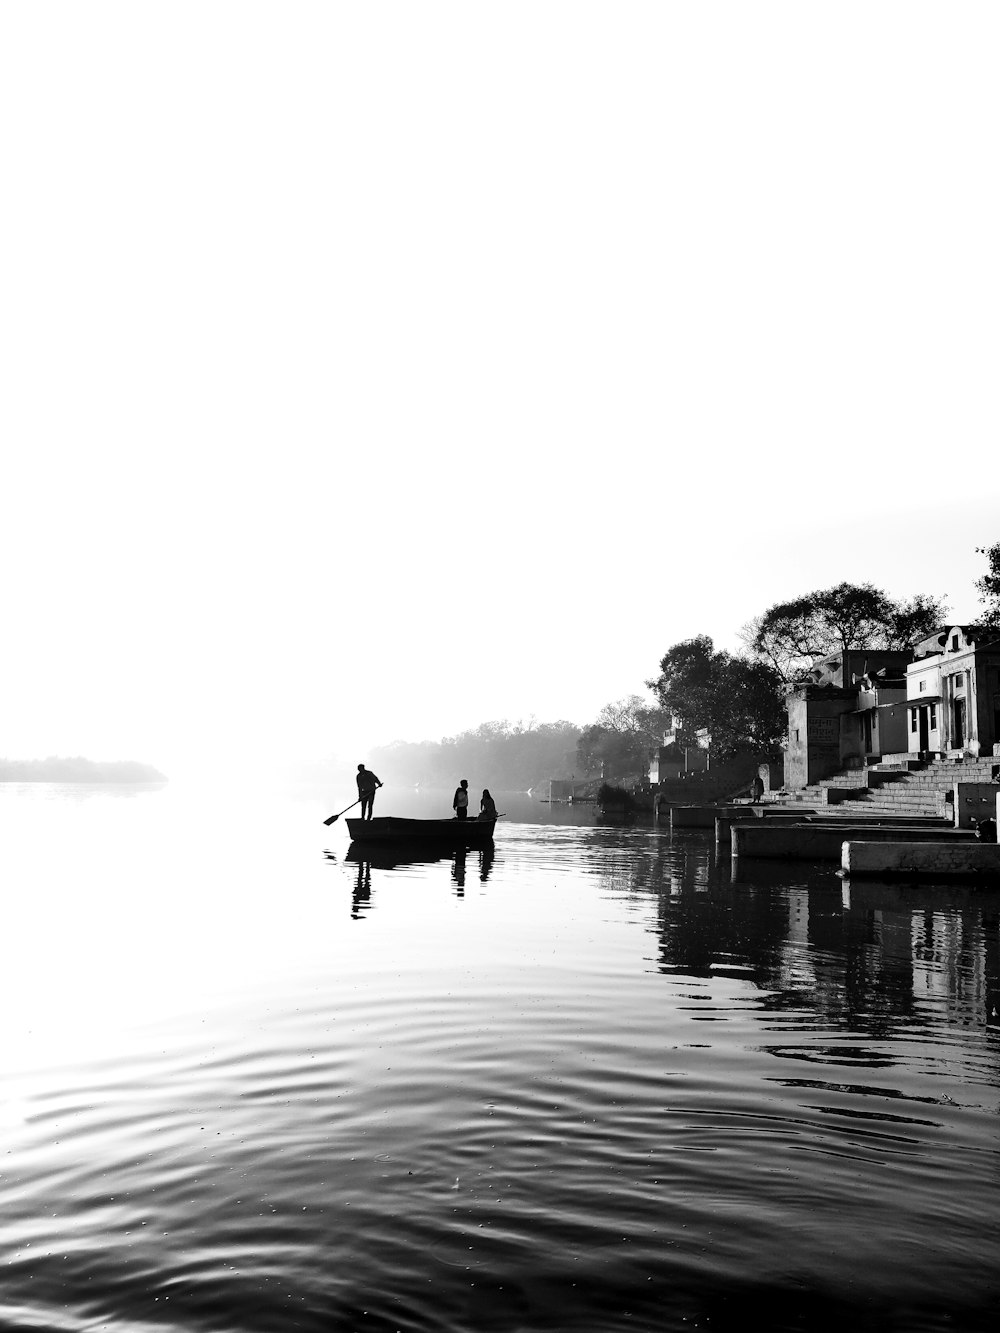 grayscale photography of three person on boat